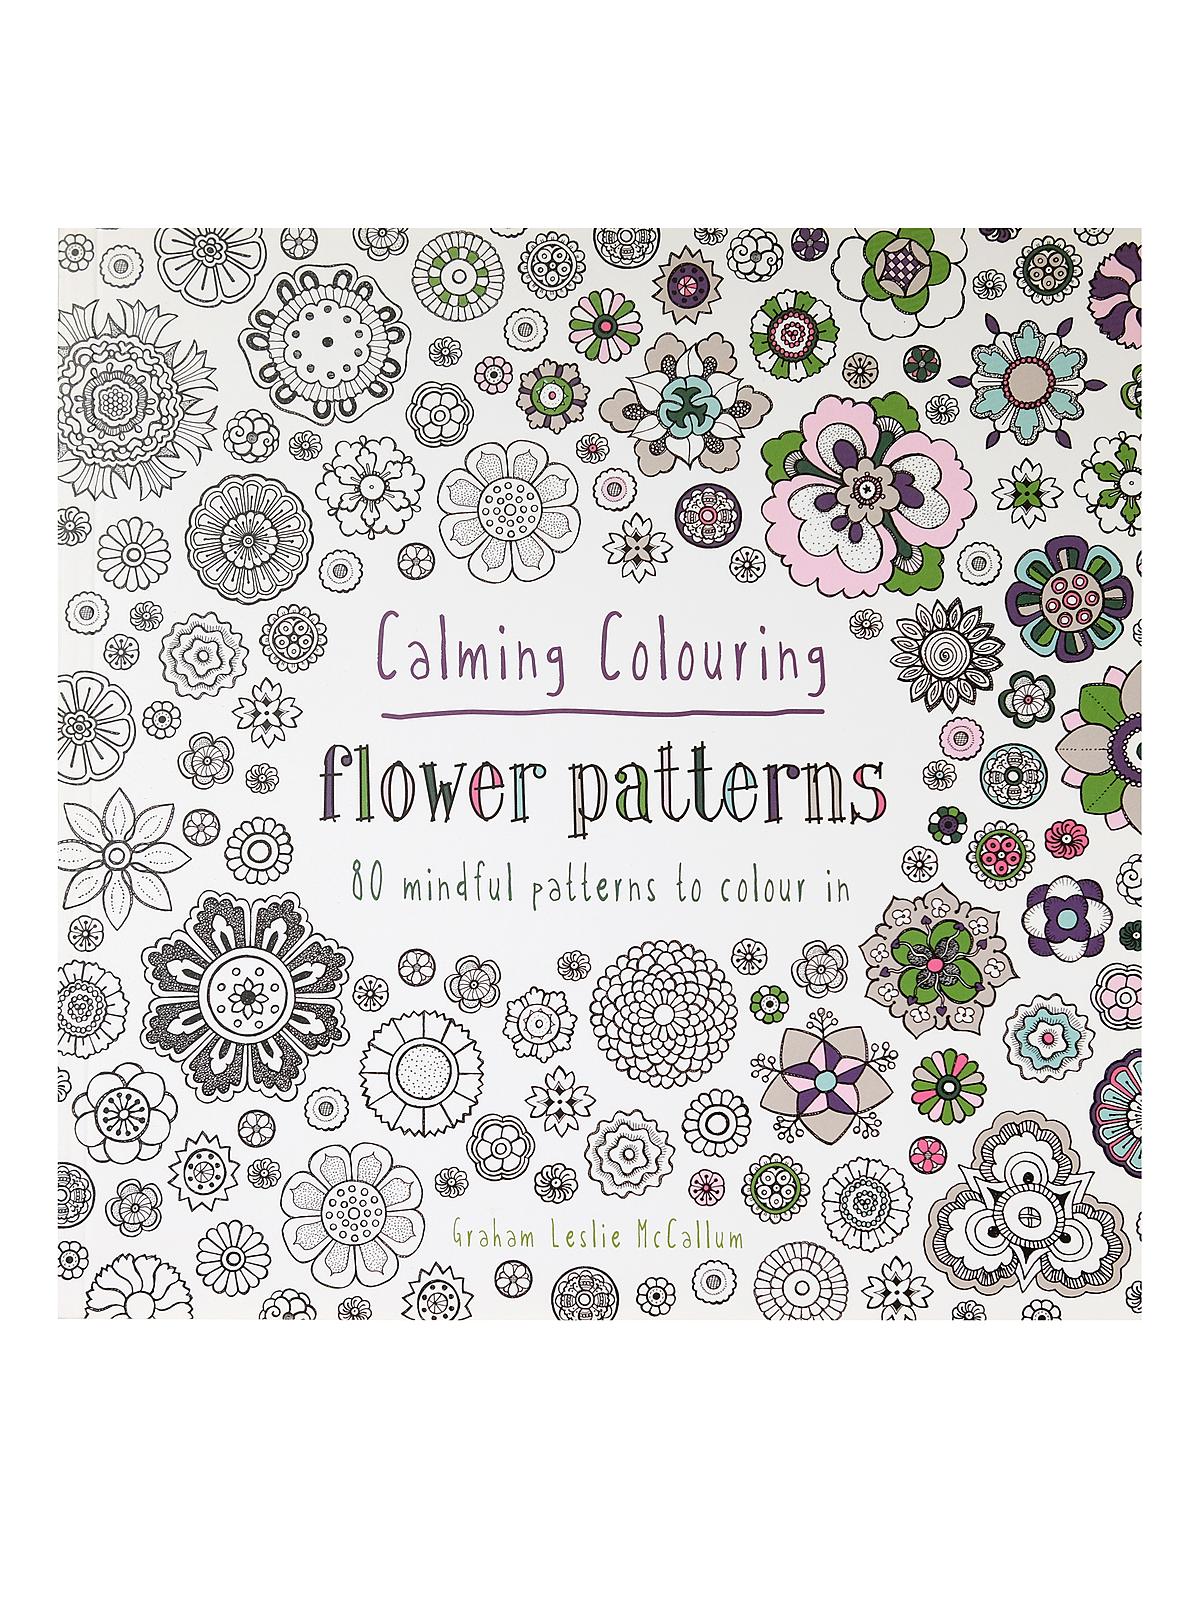 Calming Coloring Books Flower Patterns